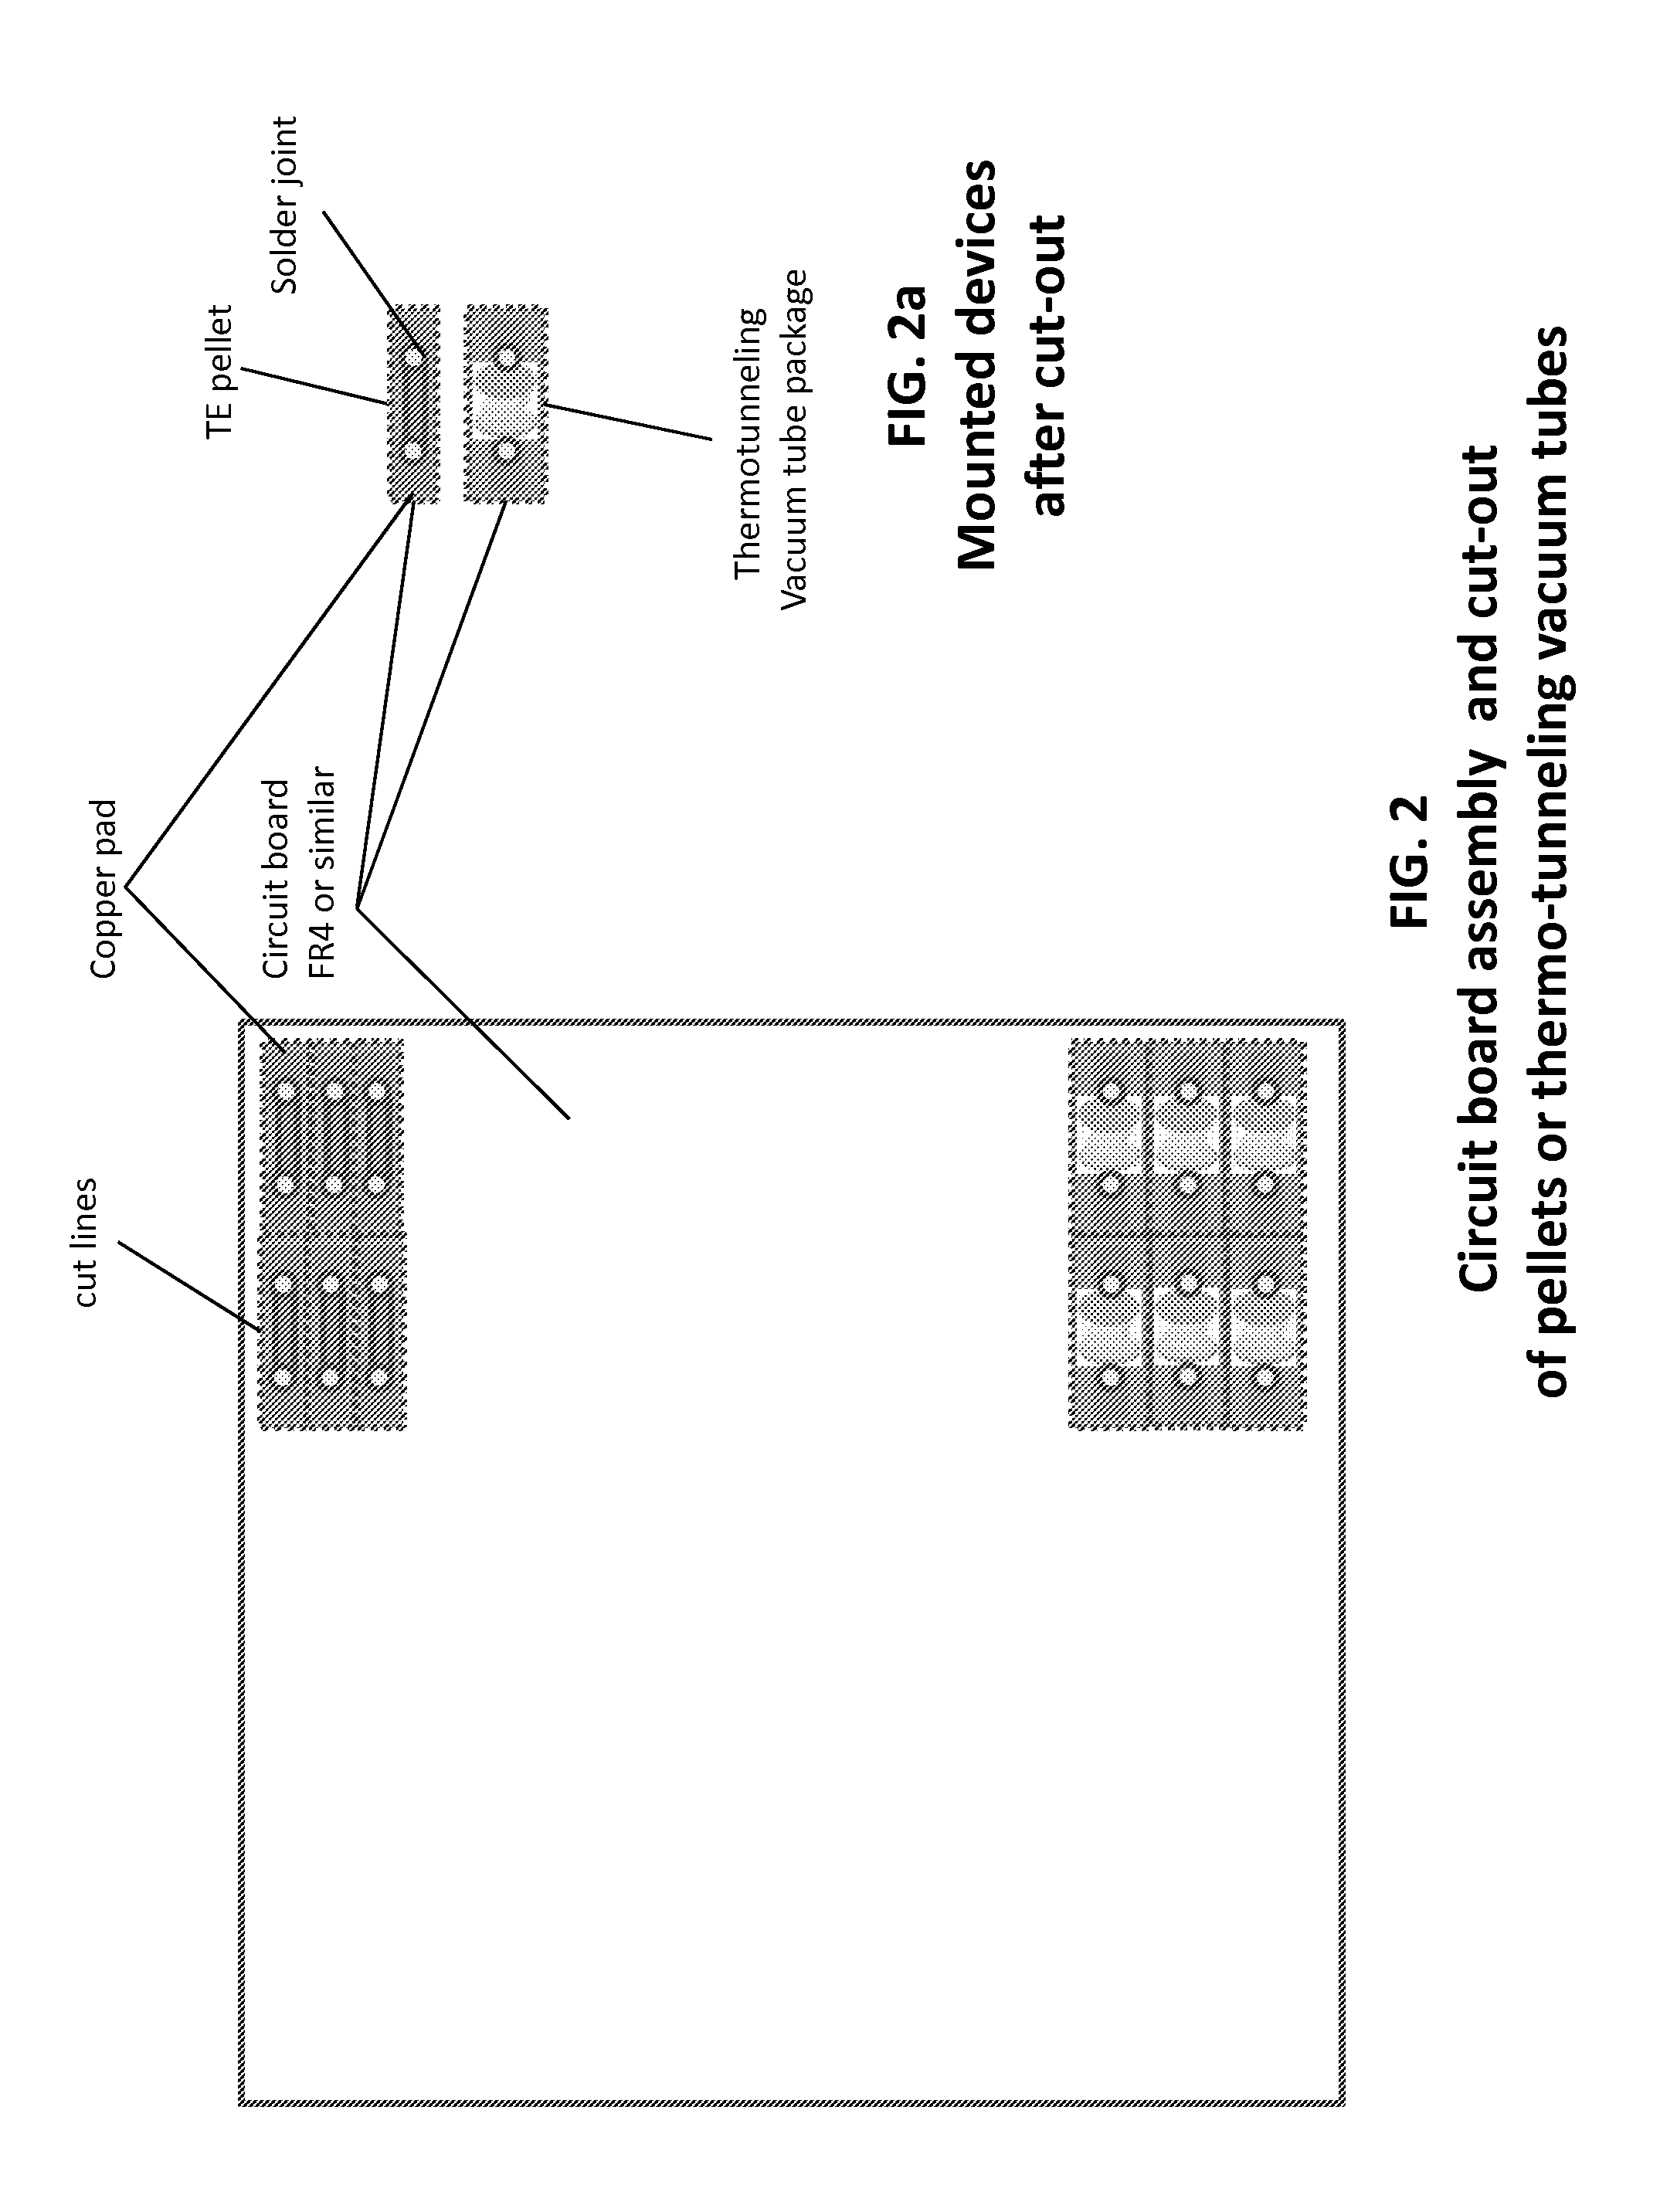 Distributed thermoelectric string and insulating panel